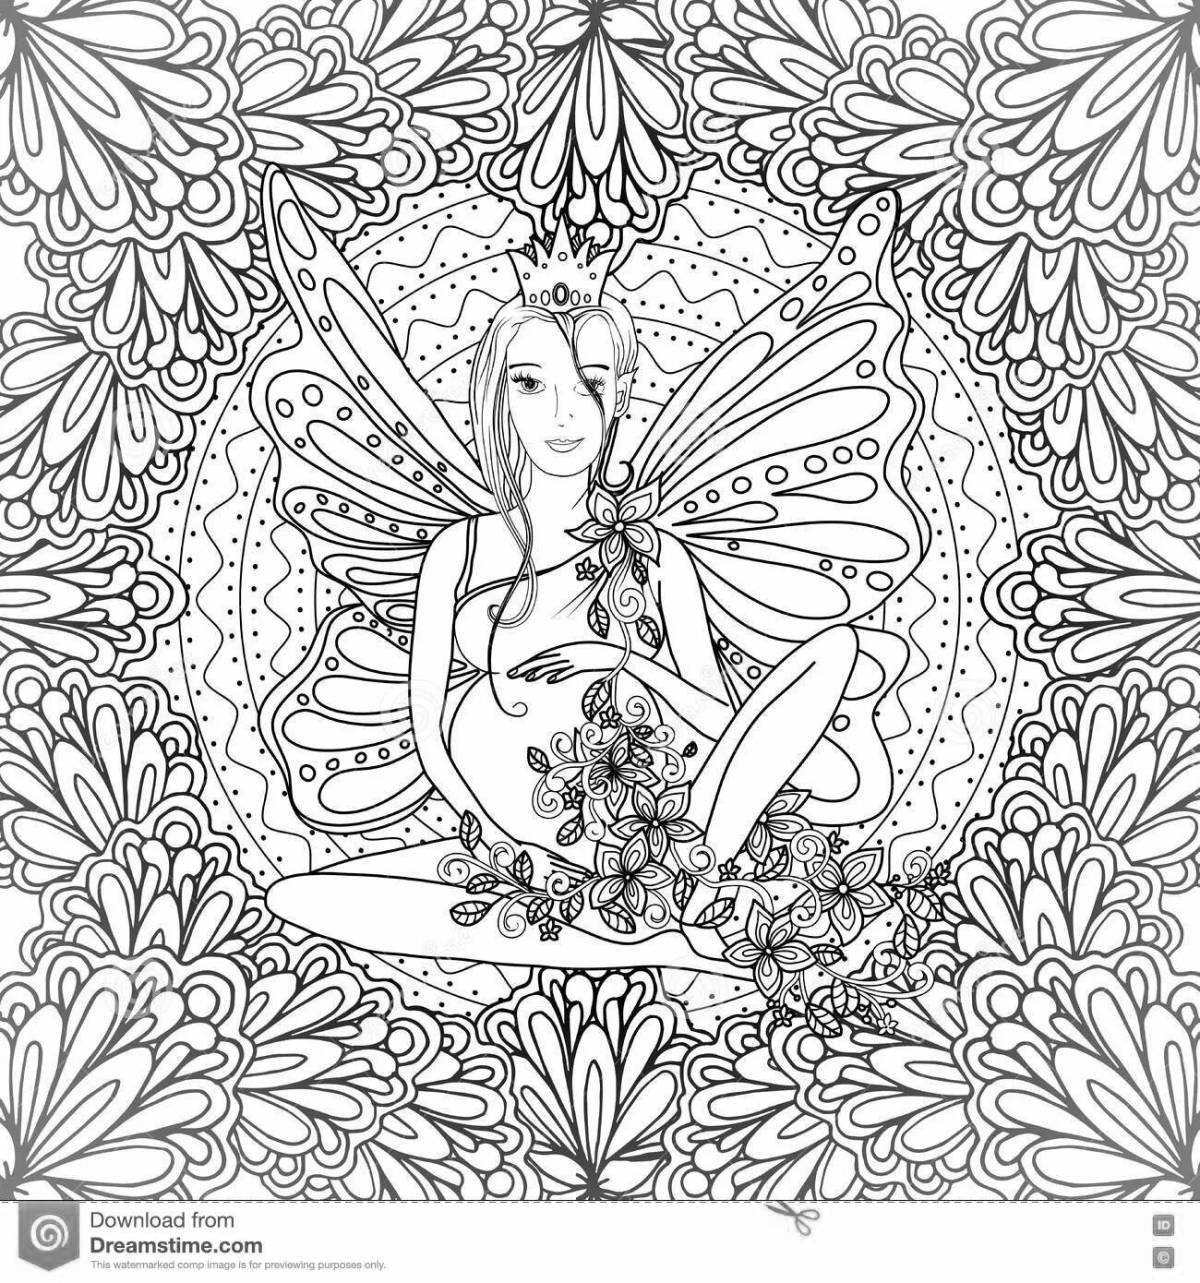 Comforting pregnancy coloring page